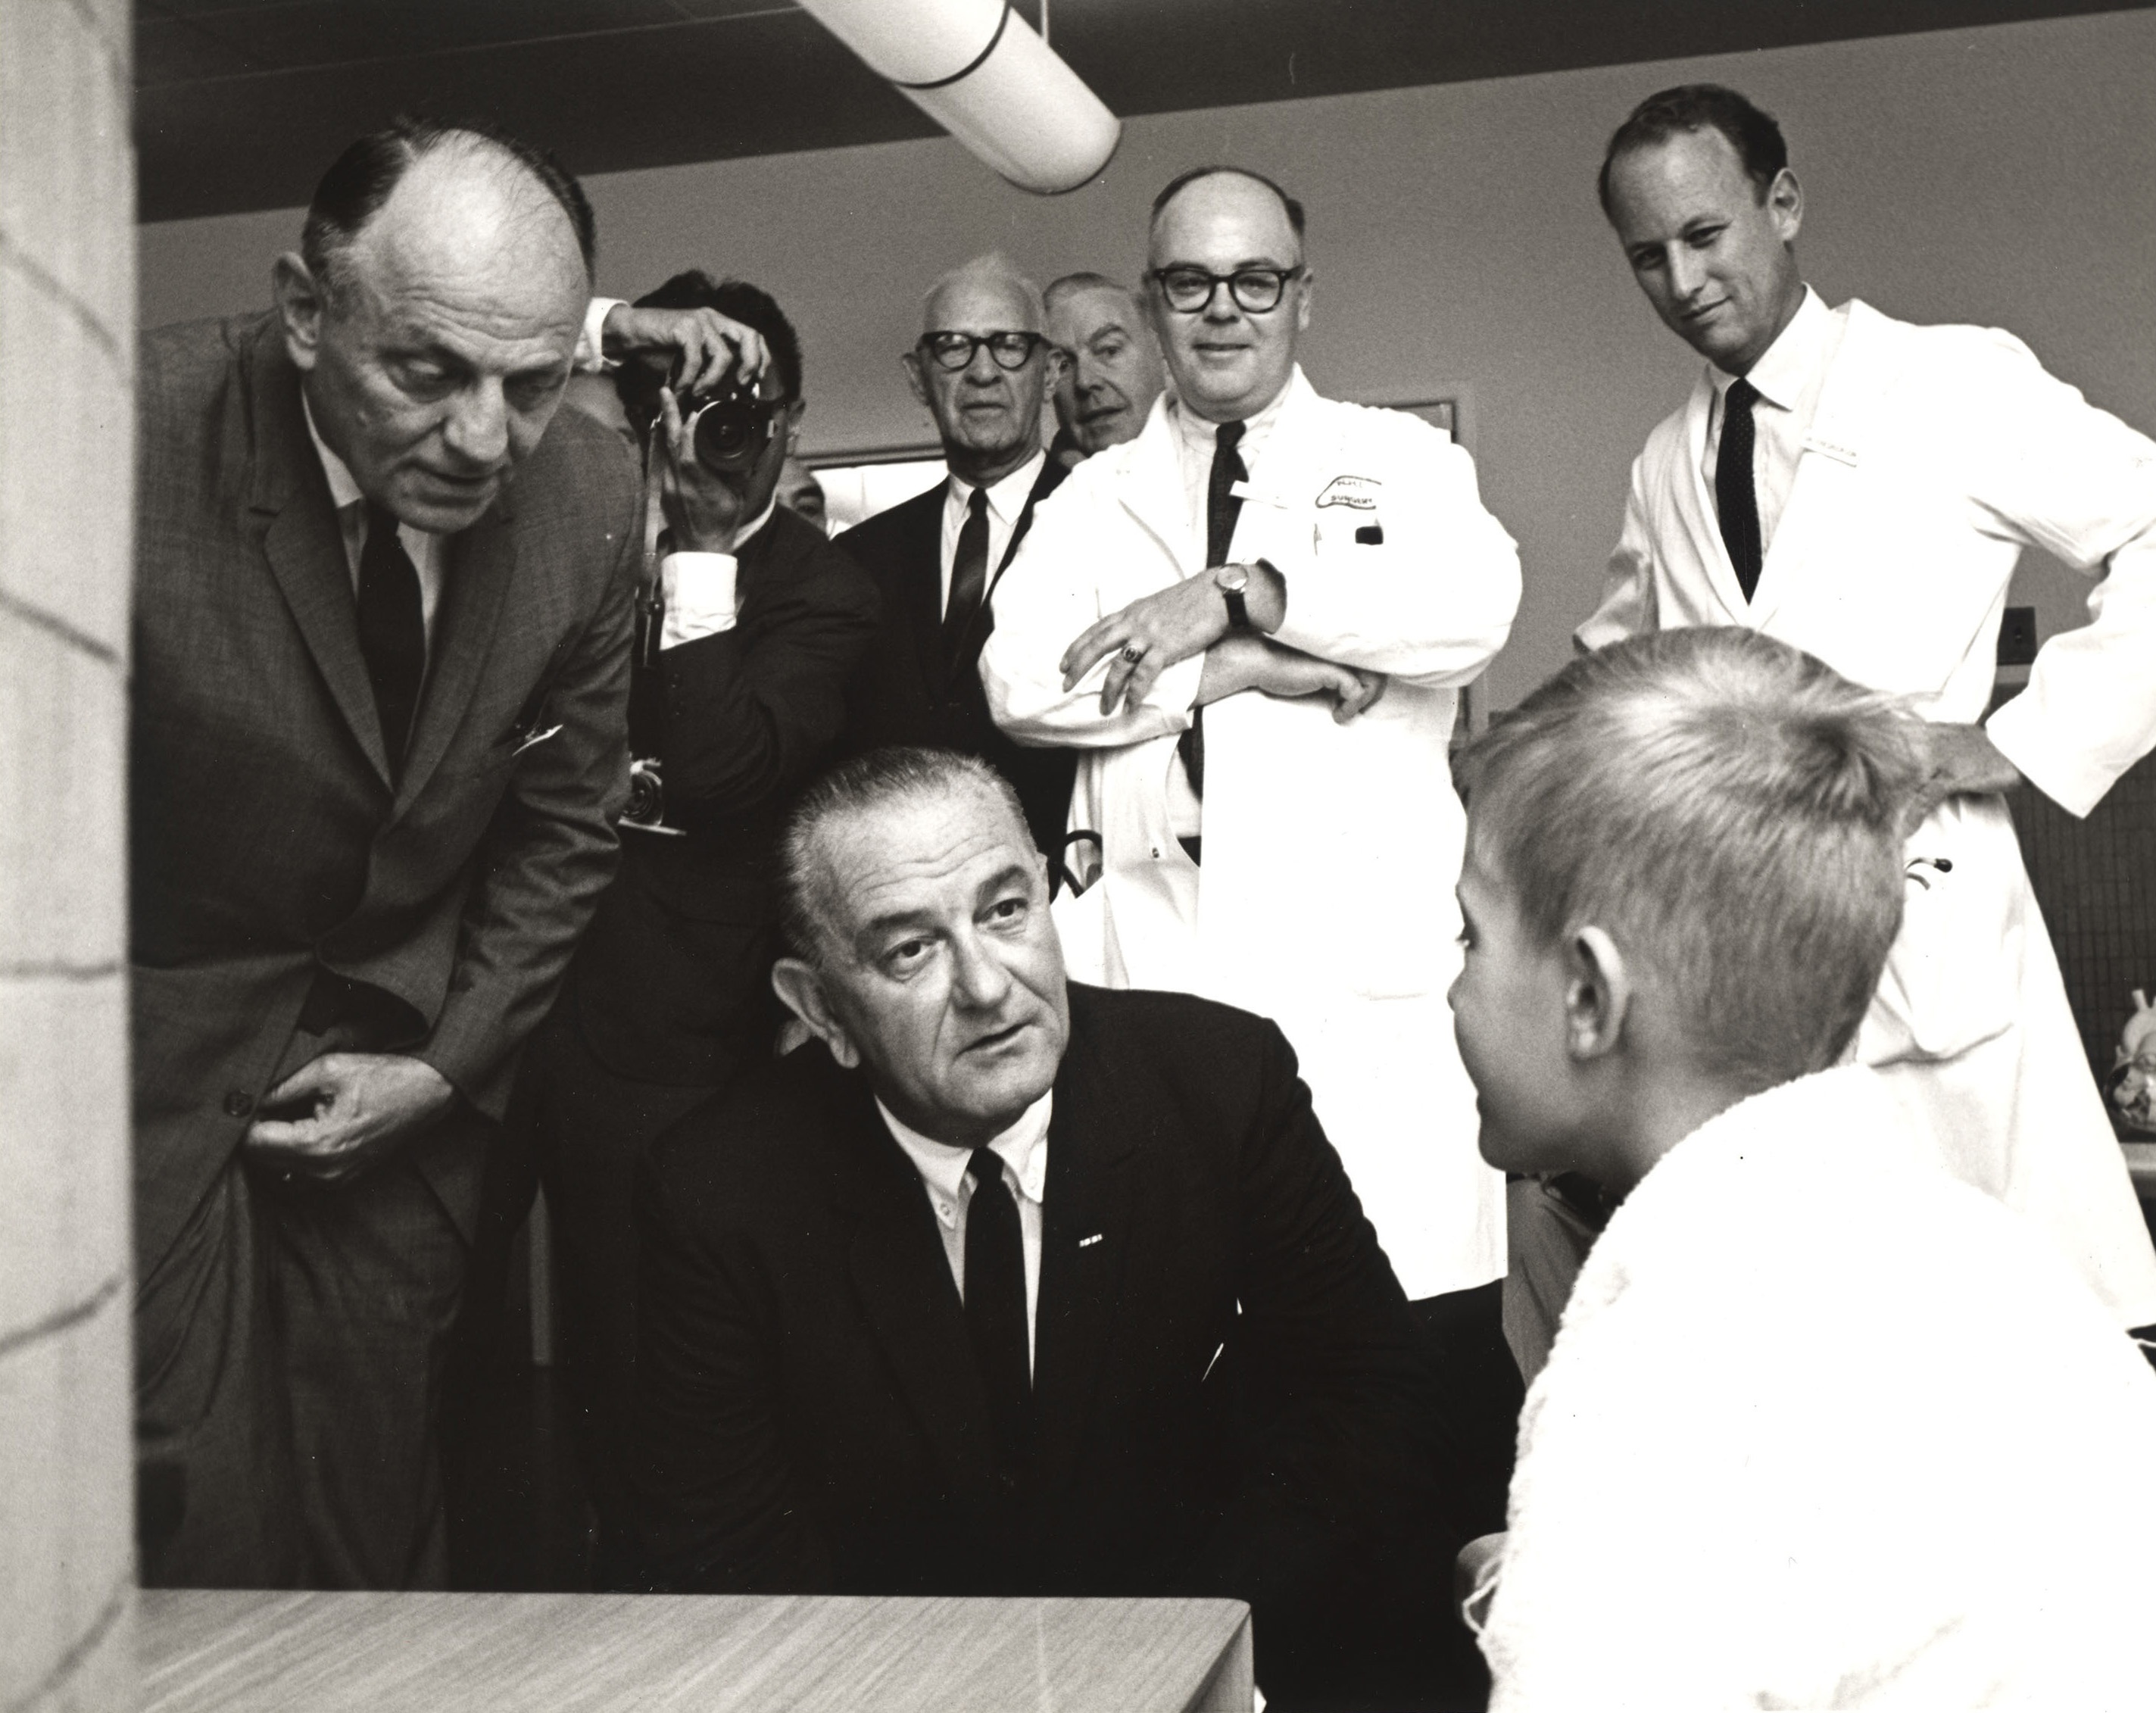 President Johnson and Dr. Morrow speak with young patient